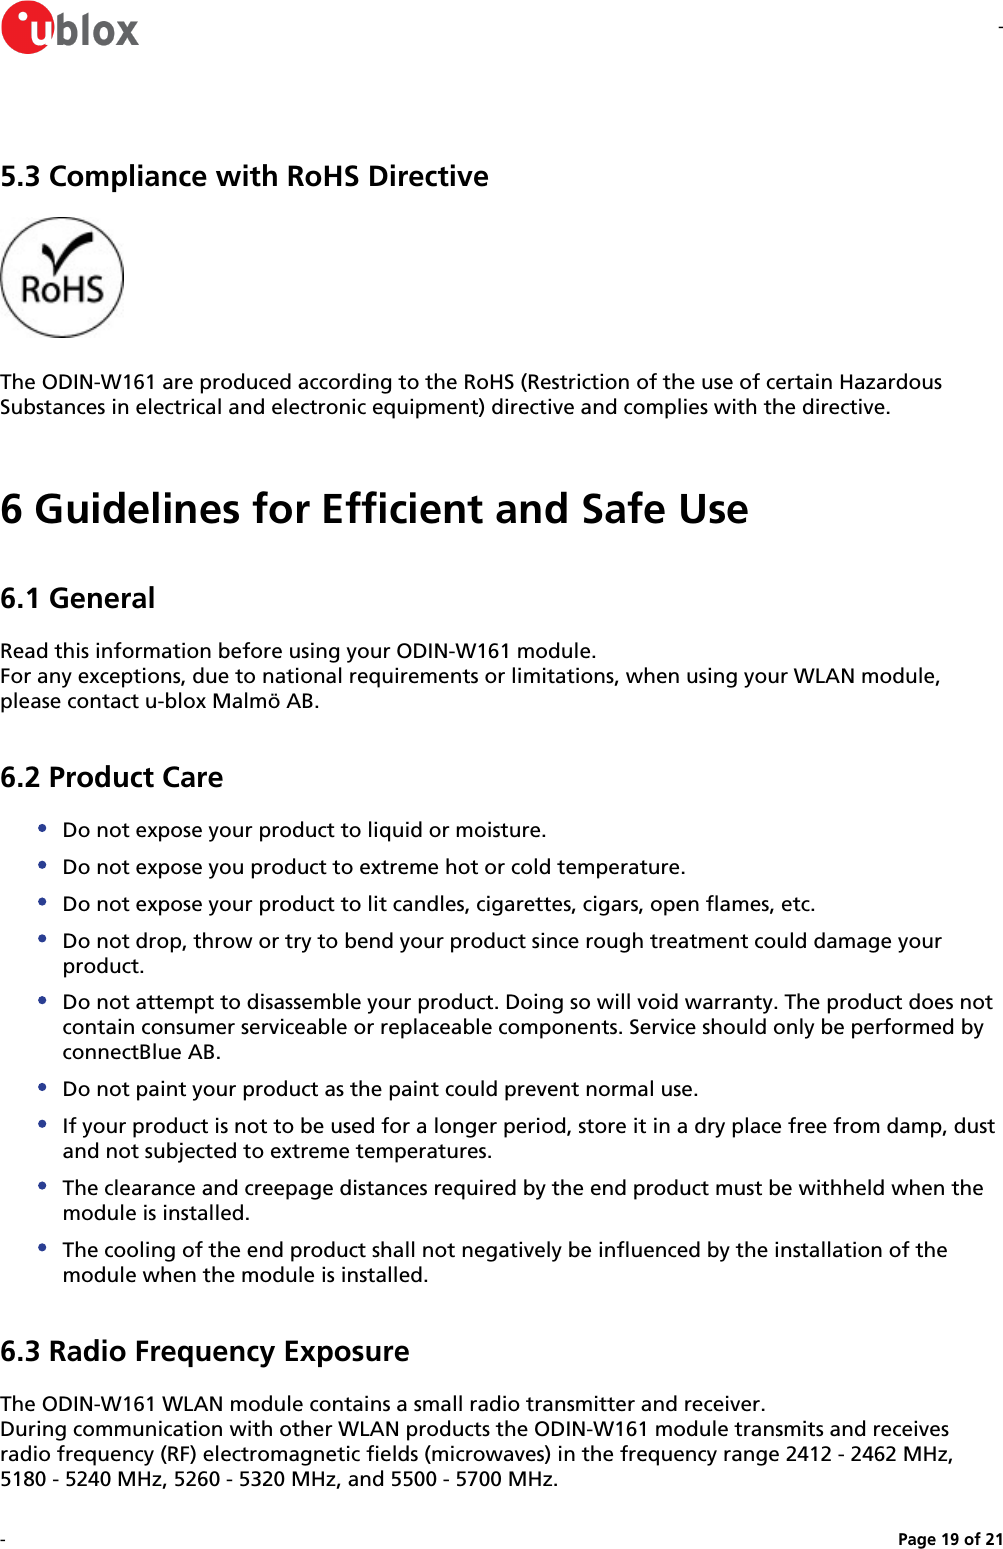 --Page   of 19 215.3 Compliance with RoHS DirectiveThe ODIN-W161 are produced according to the RoHS (Restriction of the use of certain Hazardous Substances in electrical and electronic equipment) directive and complies with the directive.6 Guidelines for Efficient and Safe Use6.1 GeneralRead this information before using your ODIN-W161 module.For any exceptions, due to national requirements or limitations, when using your WLAN module, please contact u-blox Malmö AB.6.2 Product CareDo not expose your product to liquid or moisture.Do not expose you product to extreme hot or cold temperature.Do not expose your product to lit candles, cigarettes, cigars, open flames, etc.Do not drop, throw or try to bend your product since rough treatment could damage your product.Do not attempt to disassemble your product. Doing so will void warranty. The product does not contain consumer serviceable or replaceable components. Service should only be performed by connectBlue AB.Do not paint your product as the paint could prevent normal use.If your product is not to be used for a longer period, store it in a dry place free from damp, dust and not subjected to extreme temperatures.The clearance and creepage distances required by the end product must be withheld when the module is installed.The cooling of the end product shall not negatively be influenced by the installation of the module when the module is installed.6.3 Radio Frequency ExposureThe ODIN-W161 WLAN module contains a small radio transmitter and receiver.During communication with other WLAN products the ODIN-W161 module transmits and receives radio frequency (RF) electromagnetic fields (microwaves) in the frequency range 2412 - 2462 MHz, 5180 - 5240 MHz, 5260 - 5320 MHz, and 5500 - 5700 MHz.